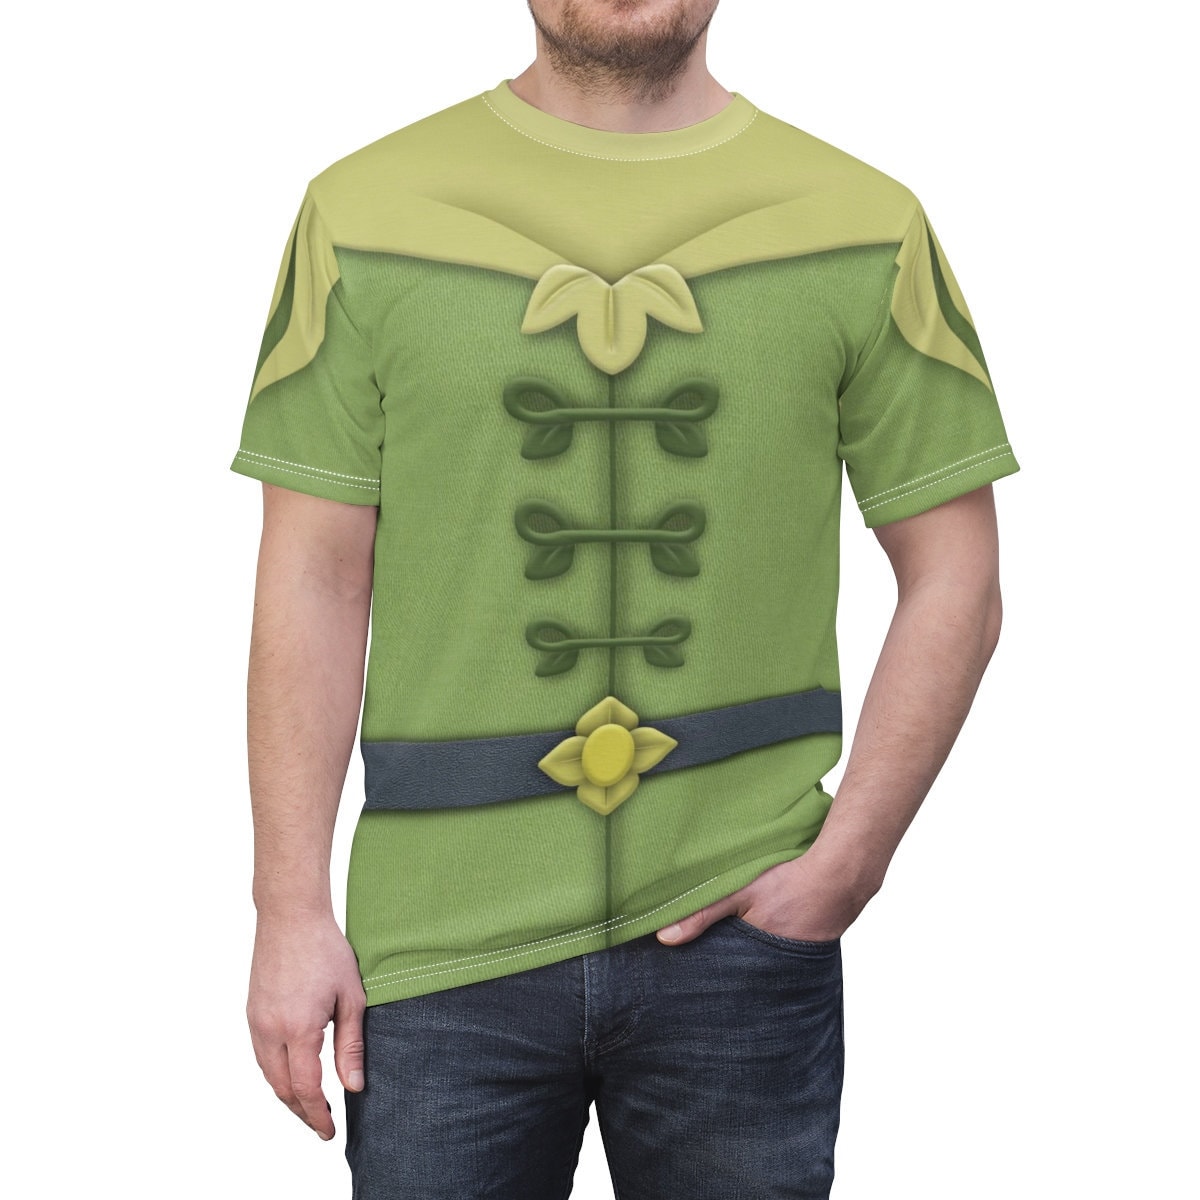 Prince Naveen Shirts Princess and the Frog Costume Disney - Etsy Sweden